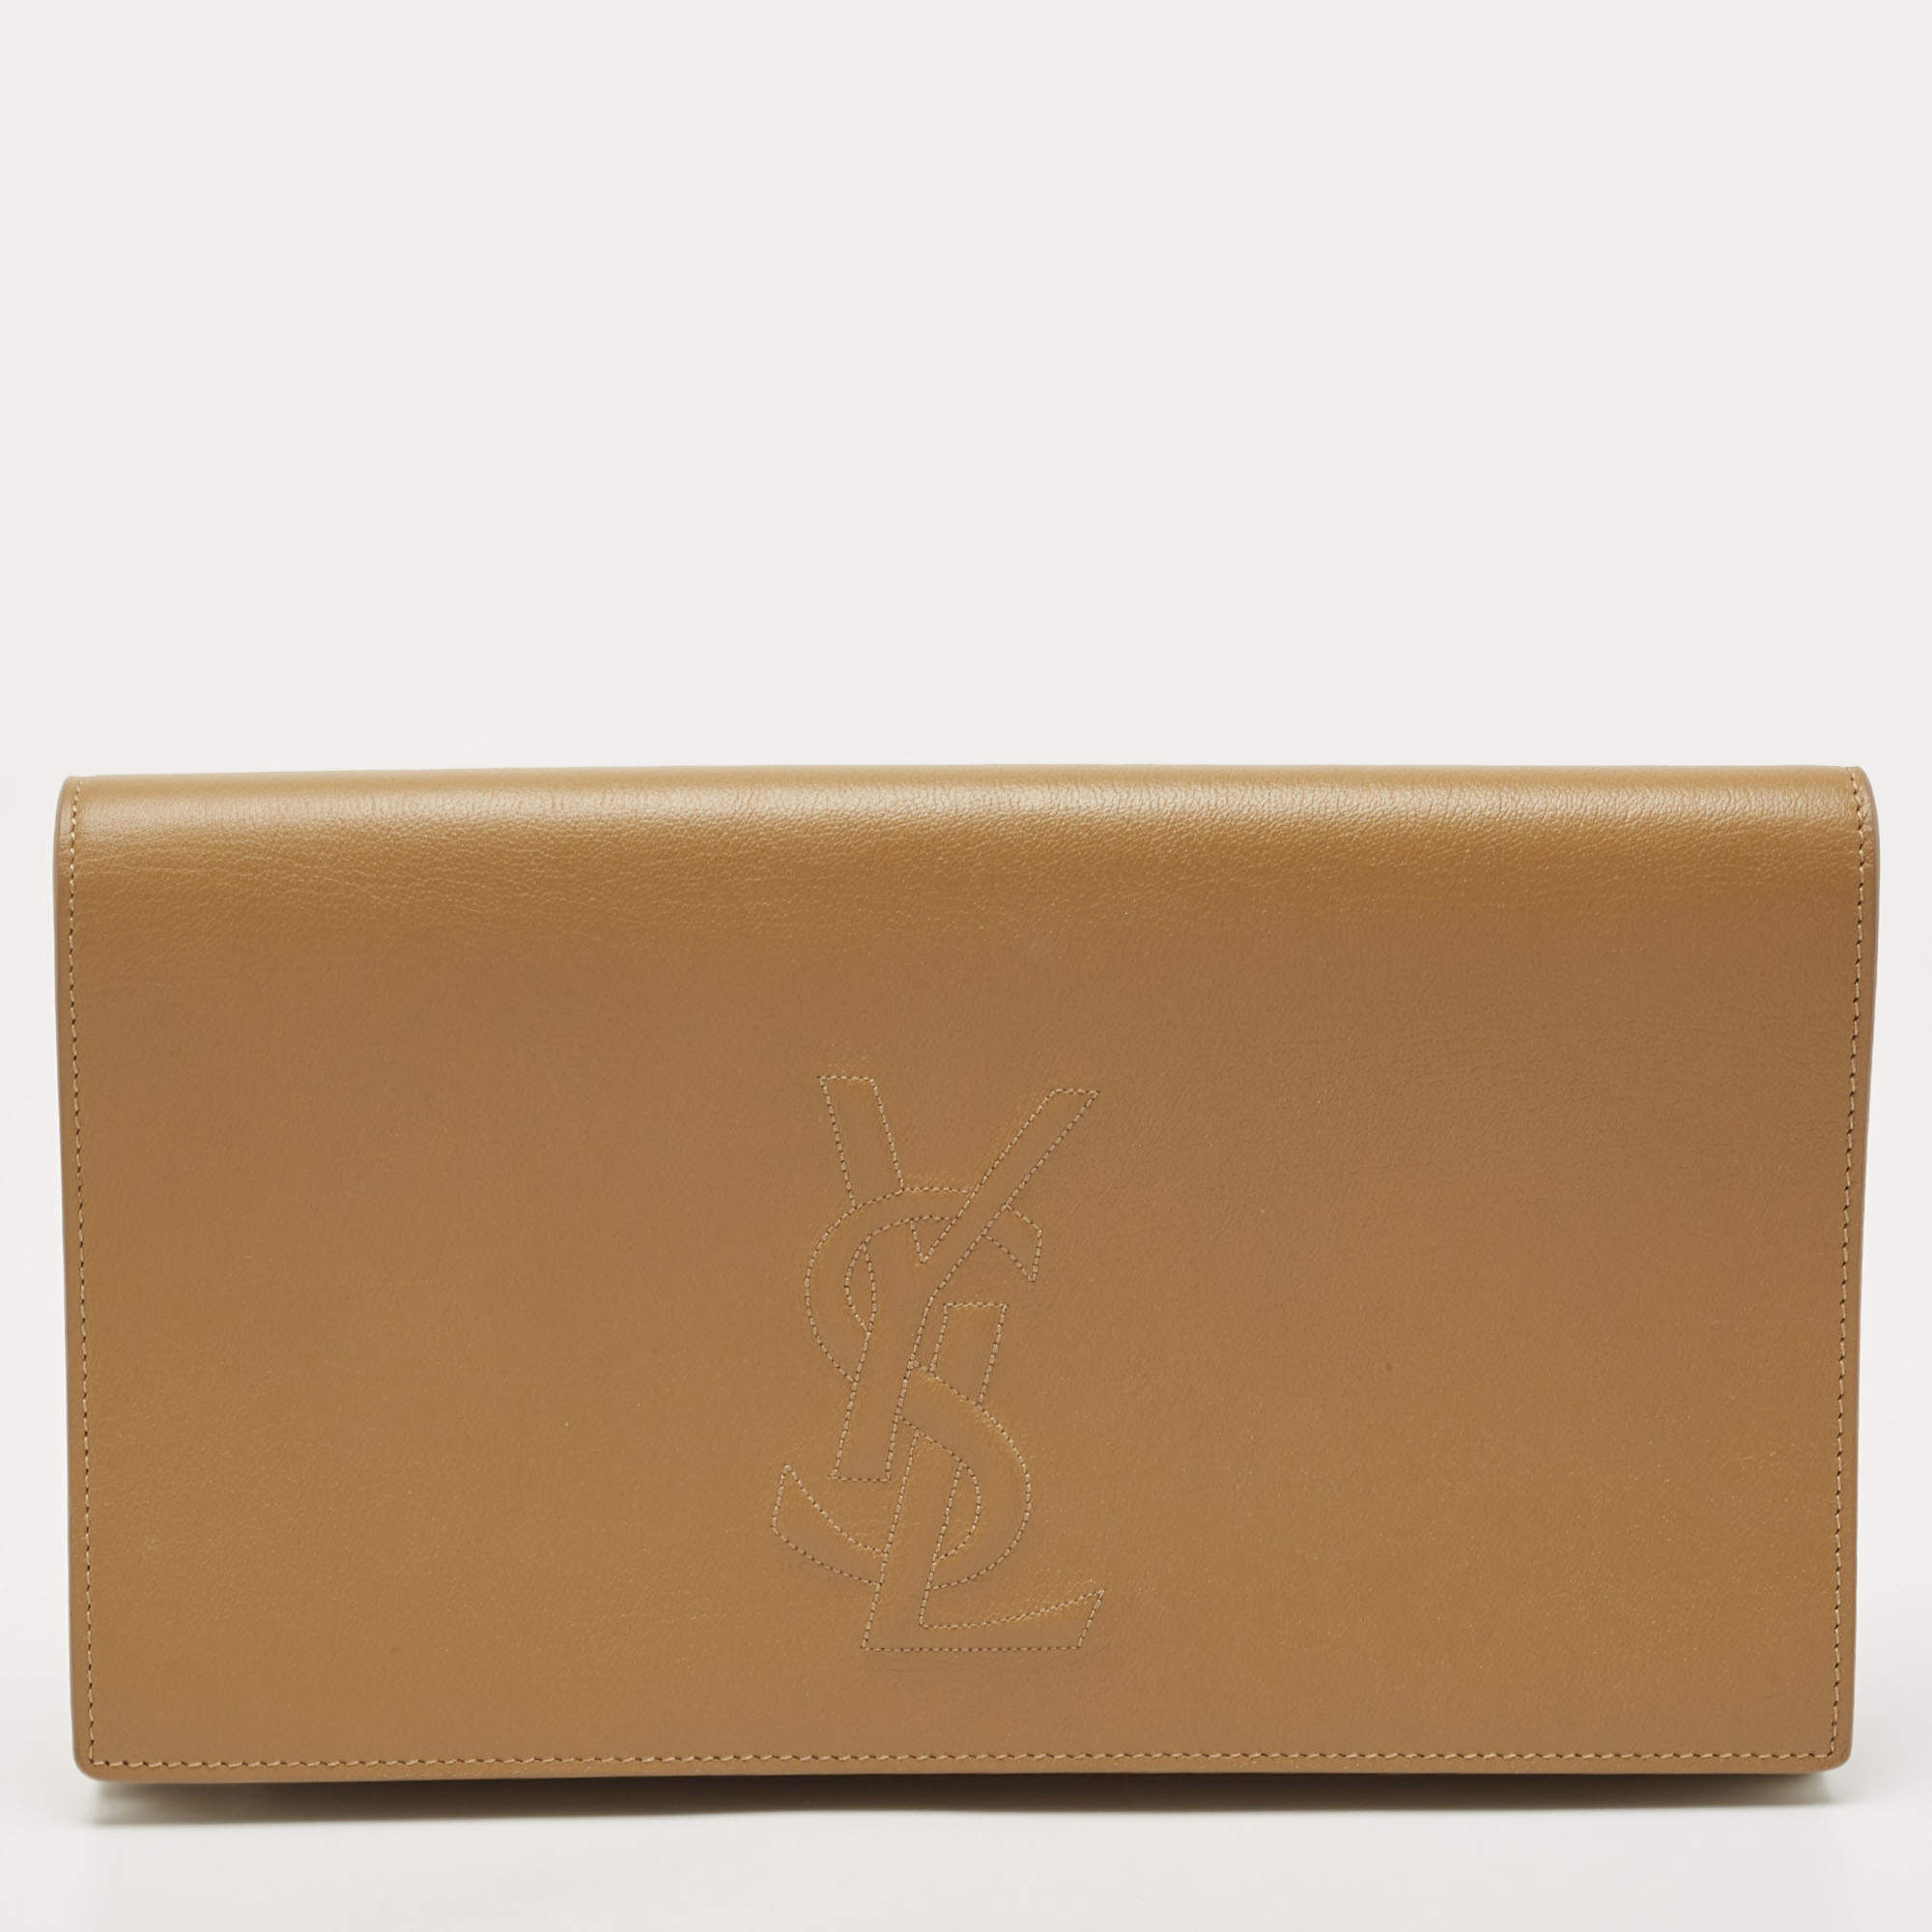 YSL beige tan clutch brand new comes with box and dustbag